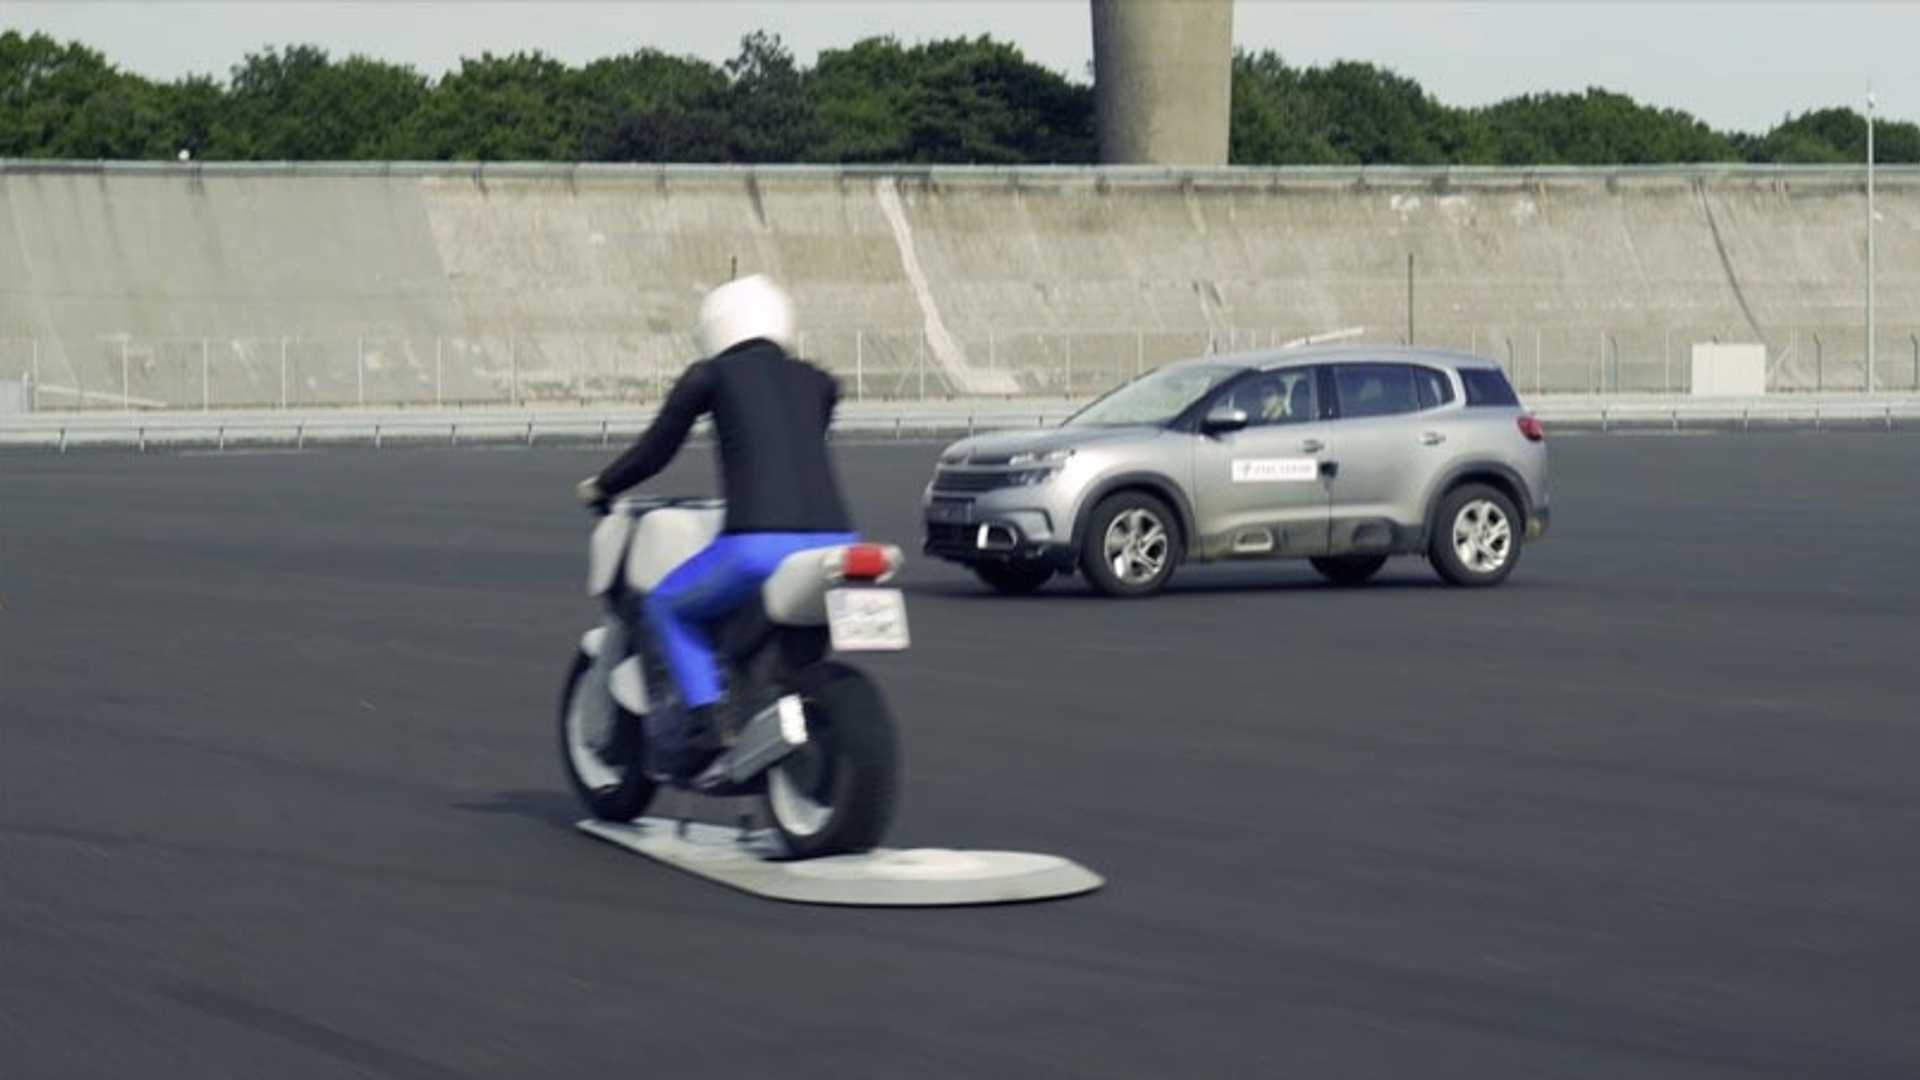 [Street] Motorcycles could soon be detected by cars and some accidents avoided [Video]